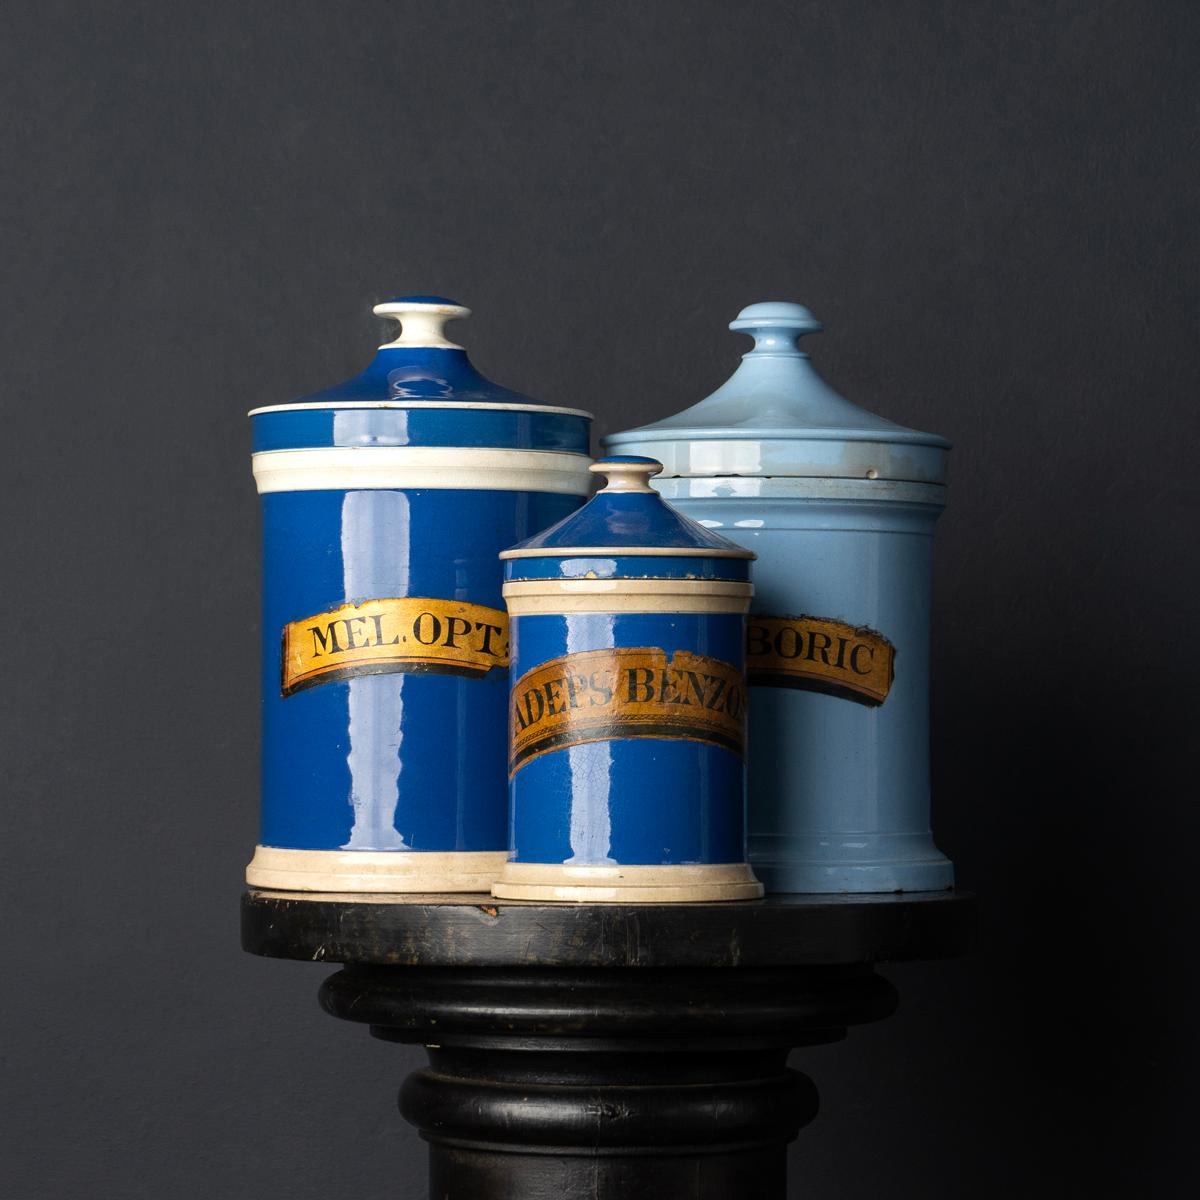 Antique ceramic chemists storage canisters
Two darker blue and white ceramic jars and one paler blue example, all with their lids and original gilt labels.

They all have some cosmetic wear and damage commensurate with age and use but are all